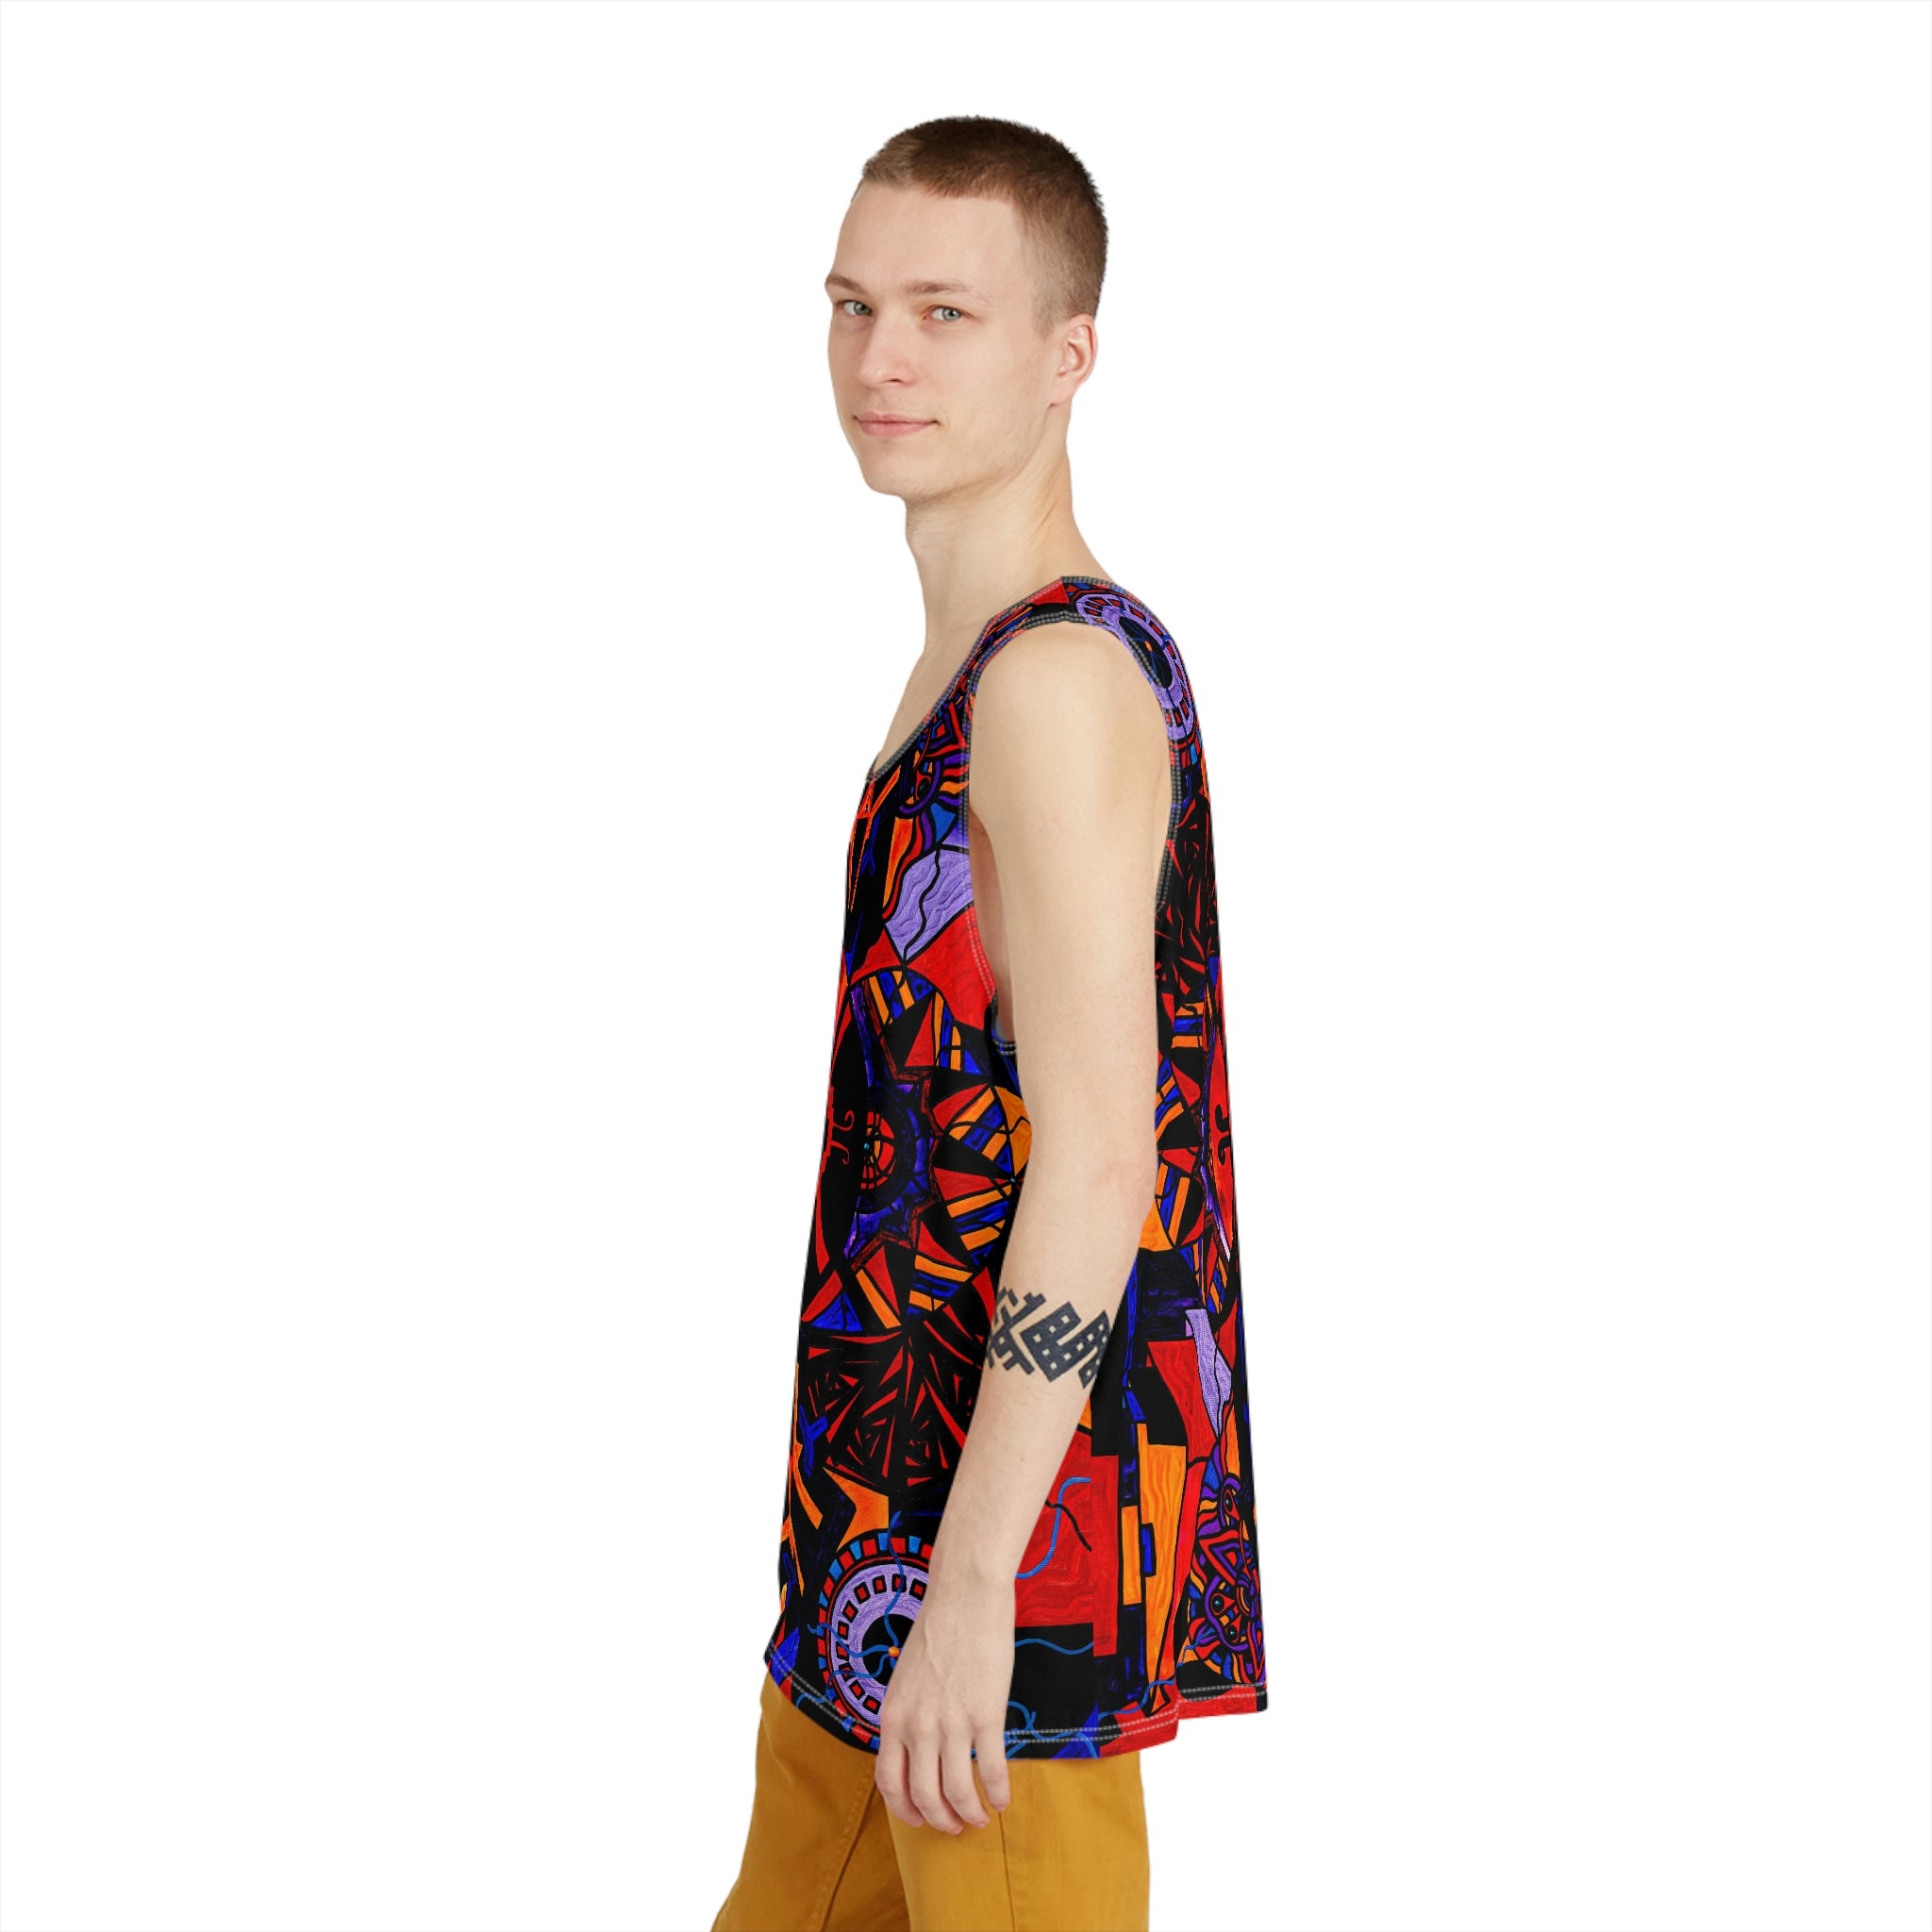 shop-for-the-latest-alnilam-strength-grid-mens-all-over-print-tank-top-fashion_5.jpg